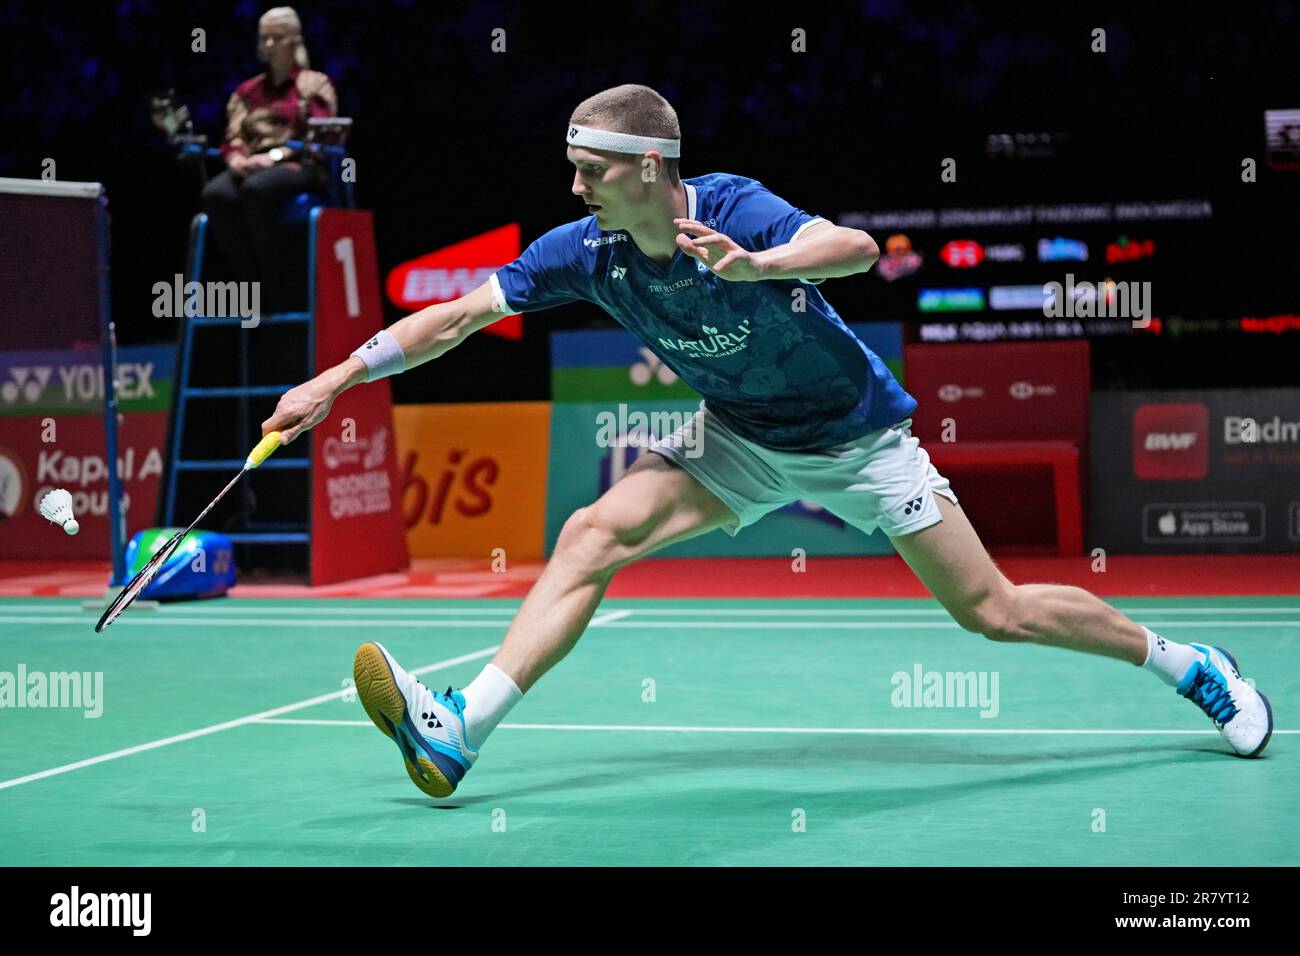 Denmarks Viktor Axelsen plays against Indonesias Anthony Sinisuka Ginting during their mens singles final match at Indonesia Open badminton tournament at Istora Senayan Stadium in Jakarta, Indonesia, Sunday, June 18, 2023